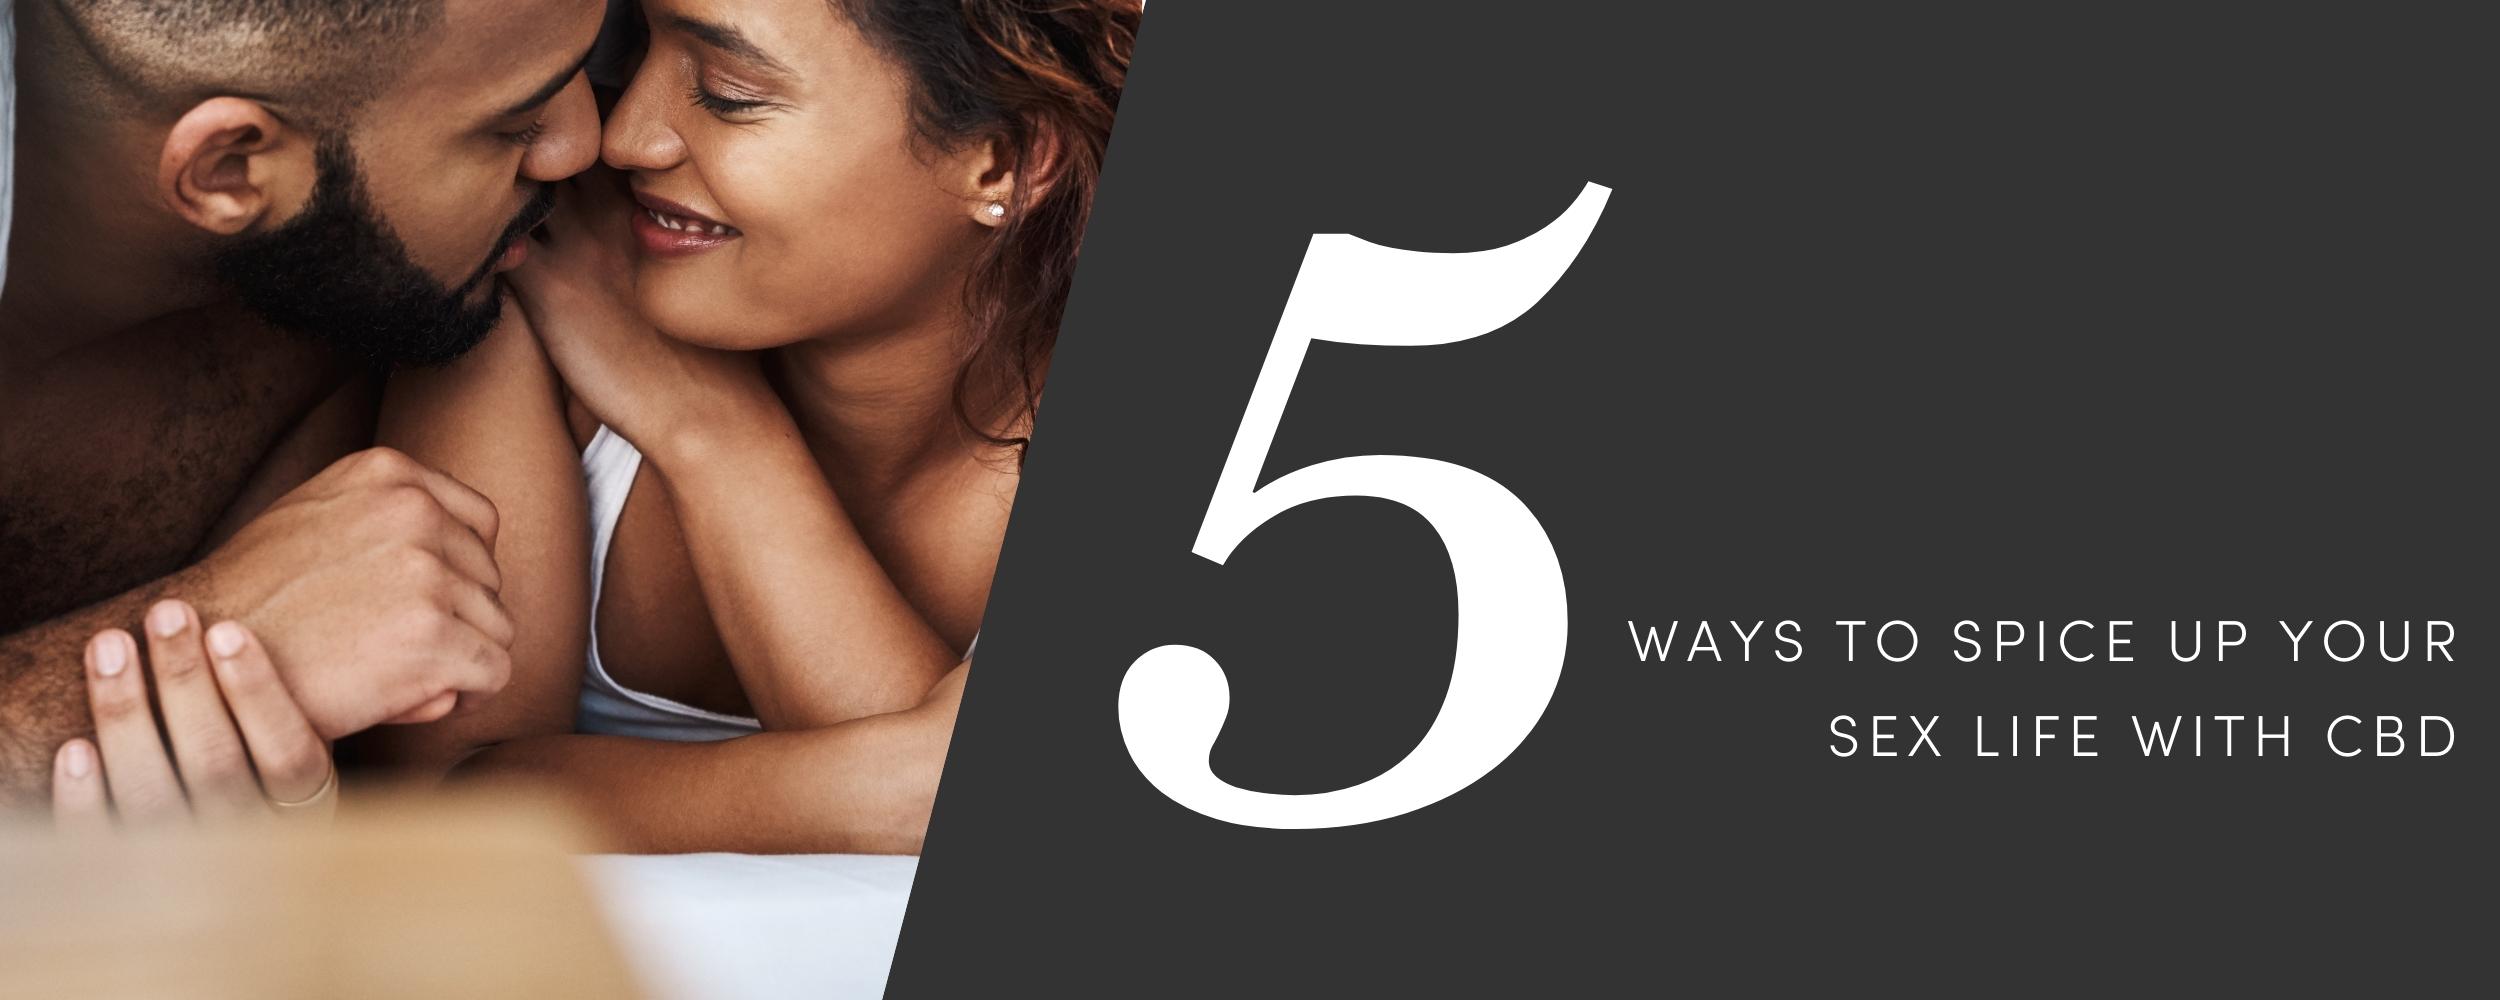 CBD for Sex 5 Ways to Spice Up Your Sex Life pic